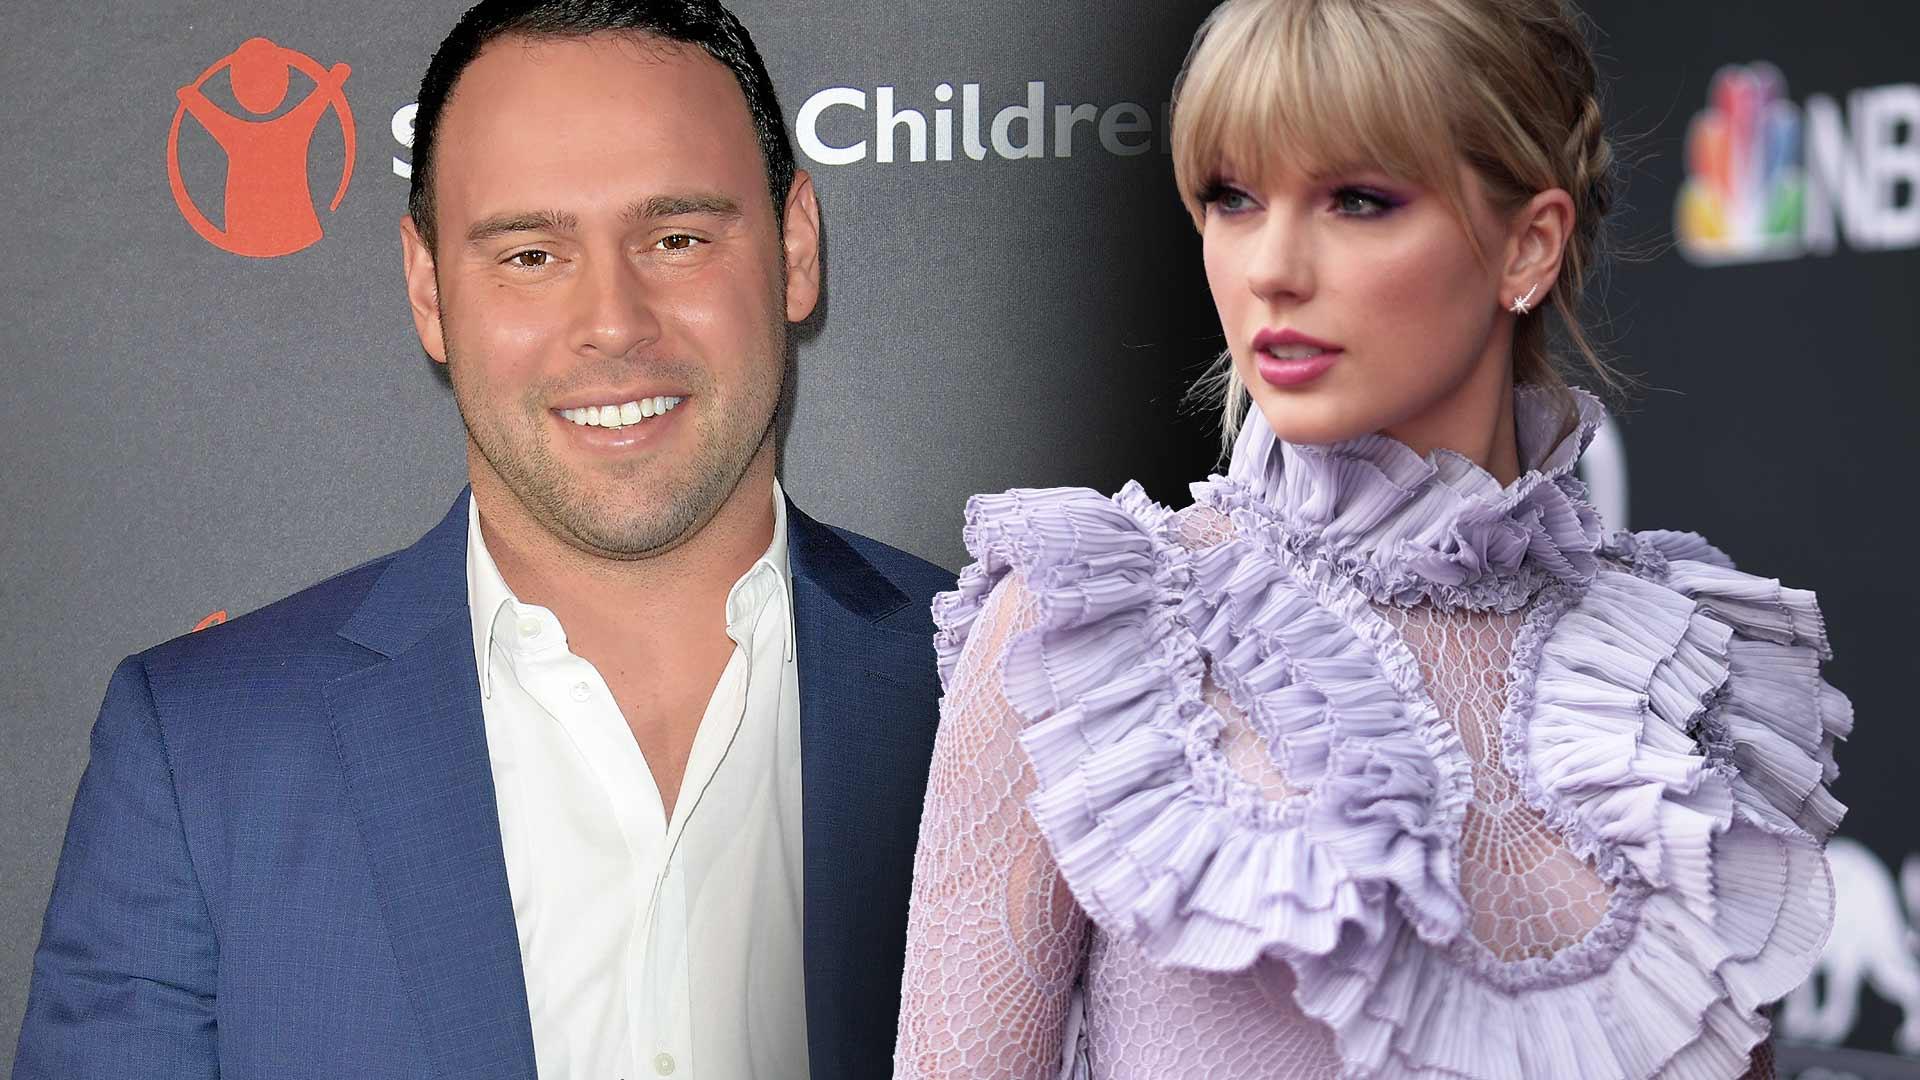 Taylor Swift Ghosted Scooter Braun After He Called Over Music Deal